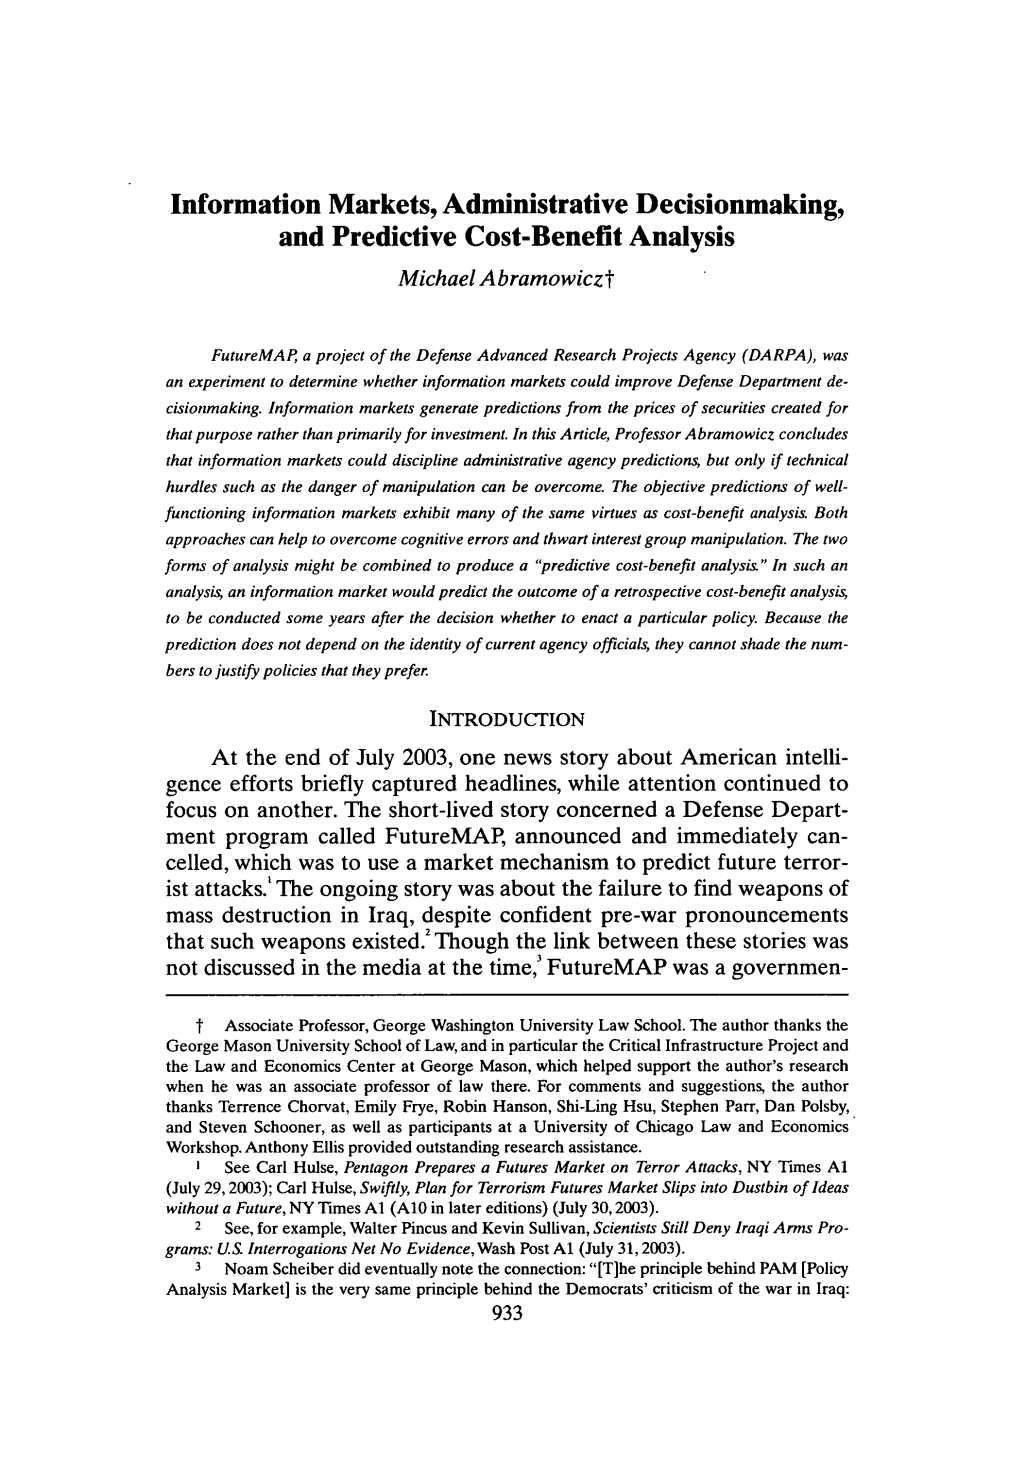 Information Markets, Administrative Decisionmaking, and Predictive Cost-Benefit Analysis Michael Abramowiczt